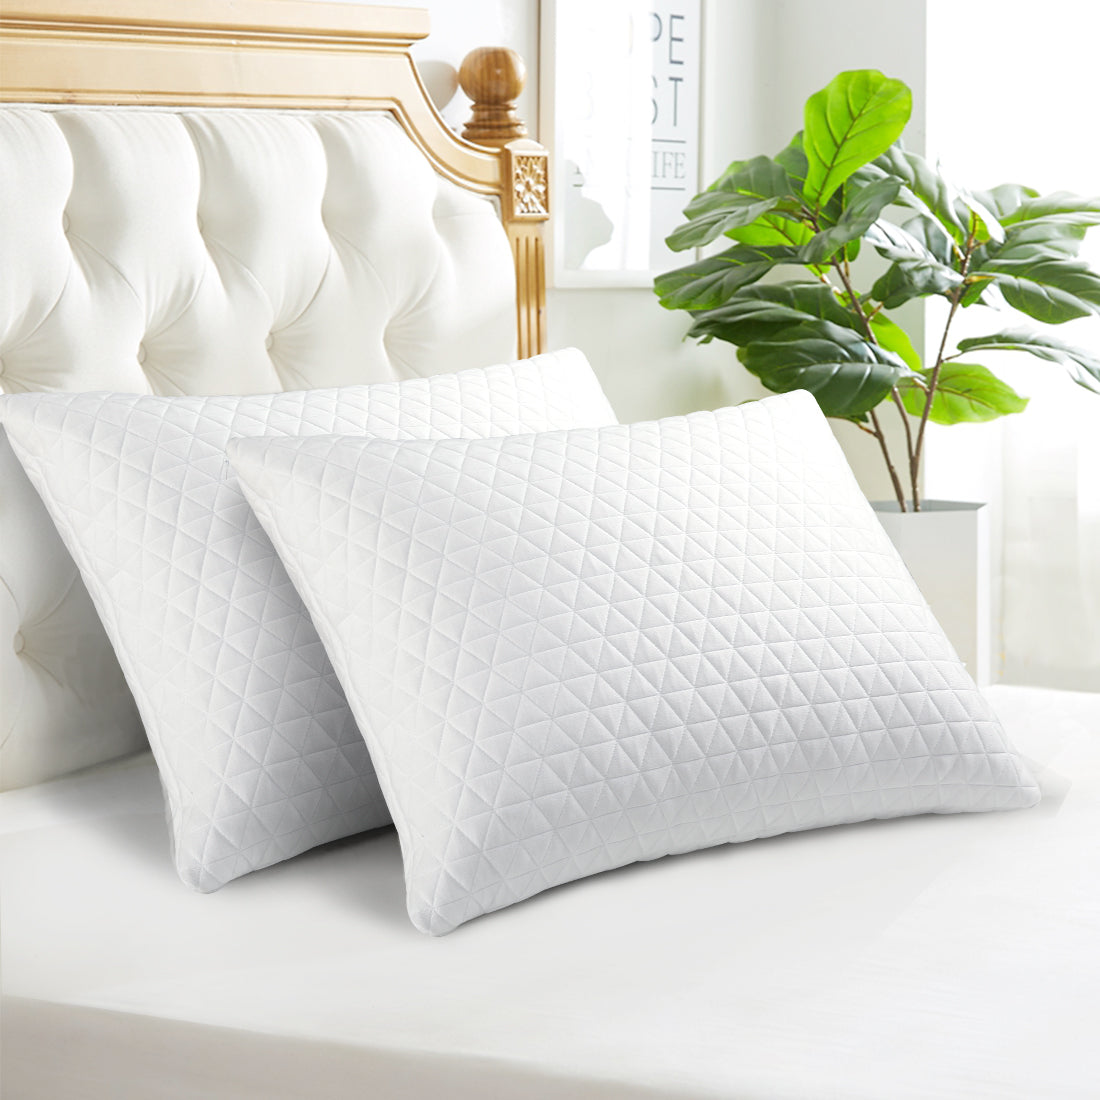 Shredded Memory Foam Pillows for Sleeping,Bed Pillows Queen Size